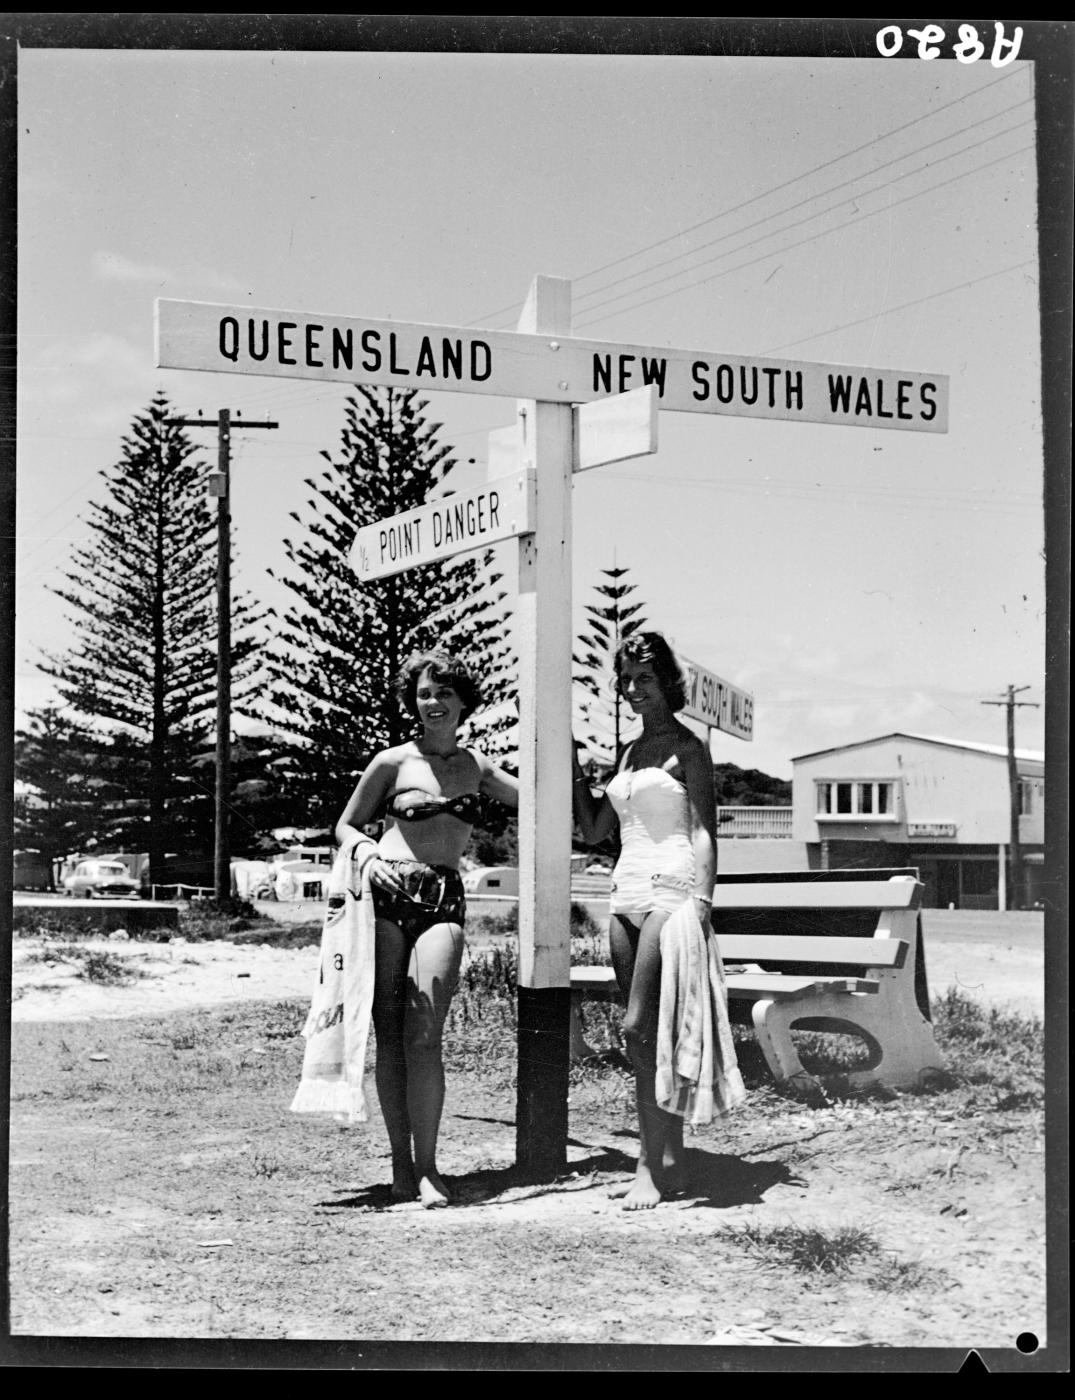 Beach girls at Queensland and New South Wales border post, Coolangatta